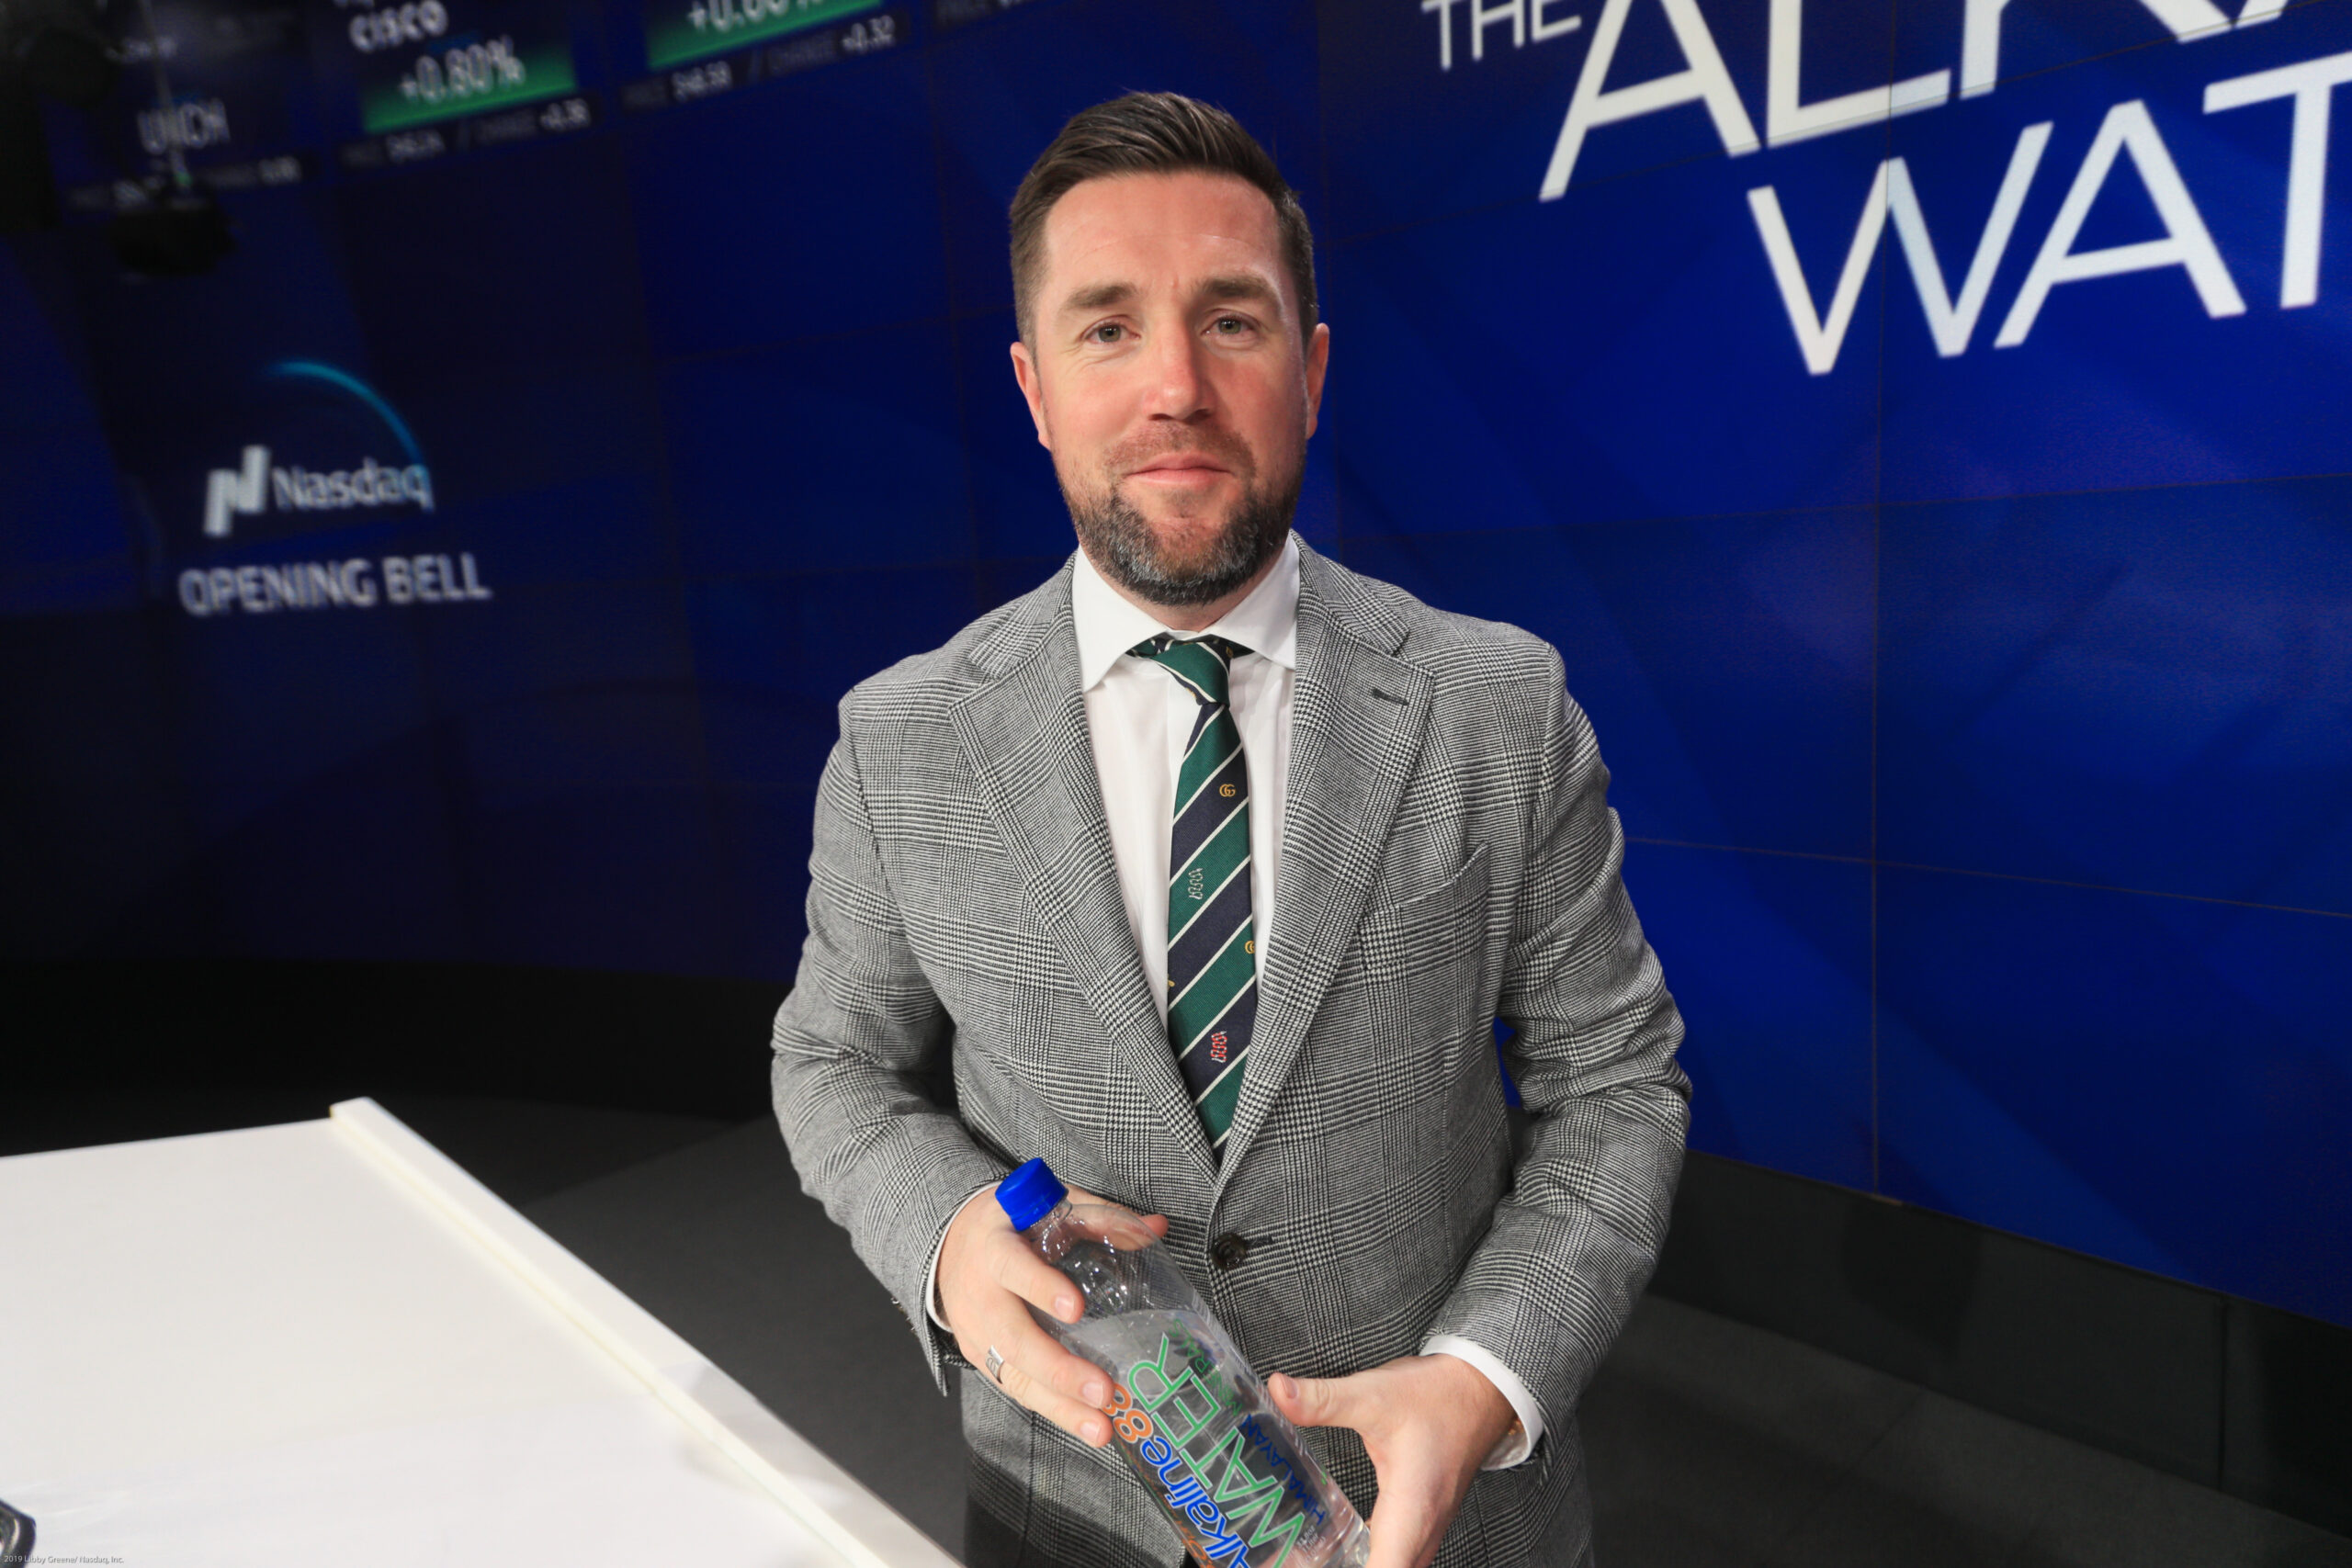 PODCAST | Have the Capacity To Meet Demand with Aaron Keay, Chairman of the Alkaline Water Company